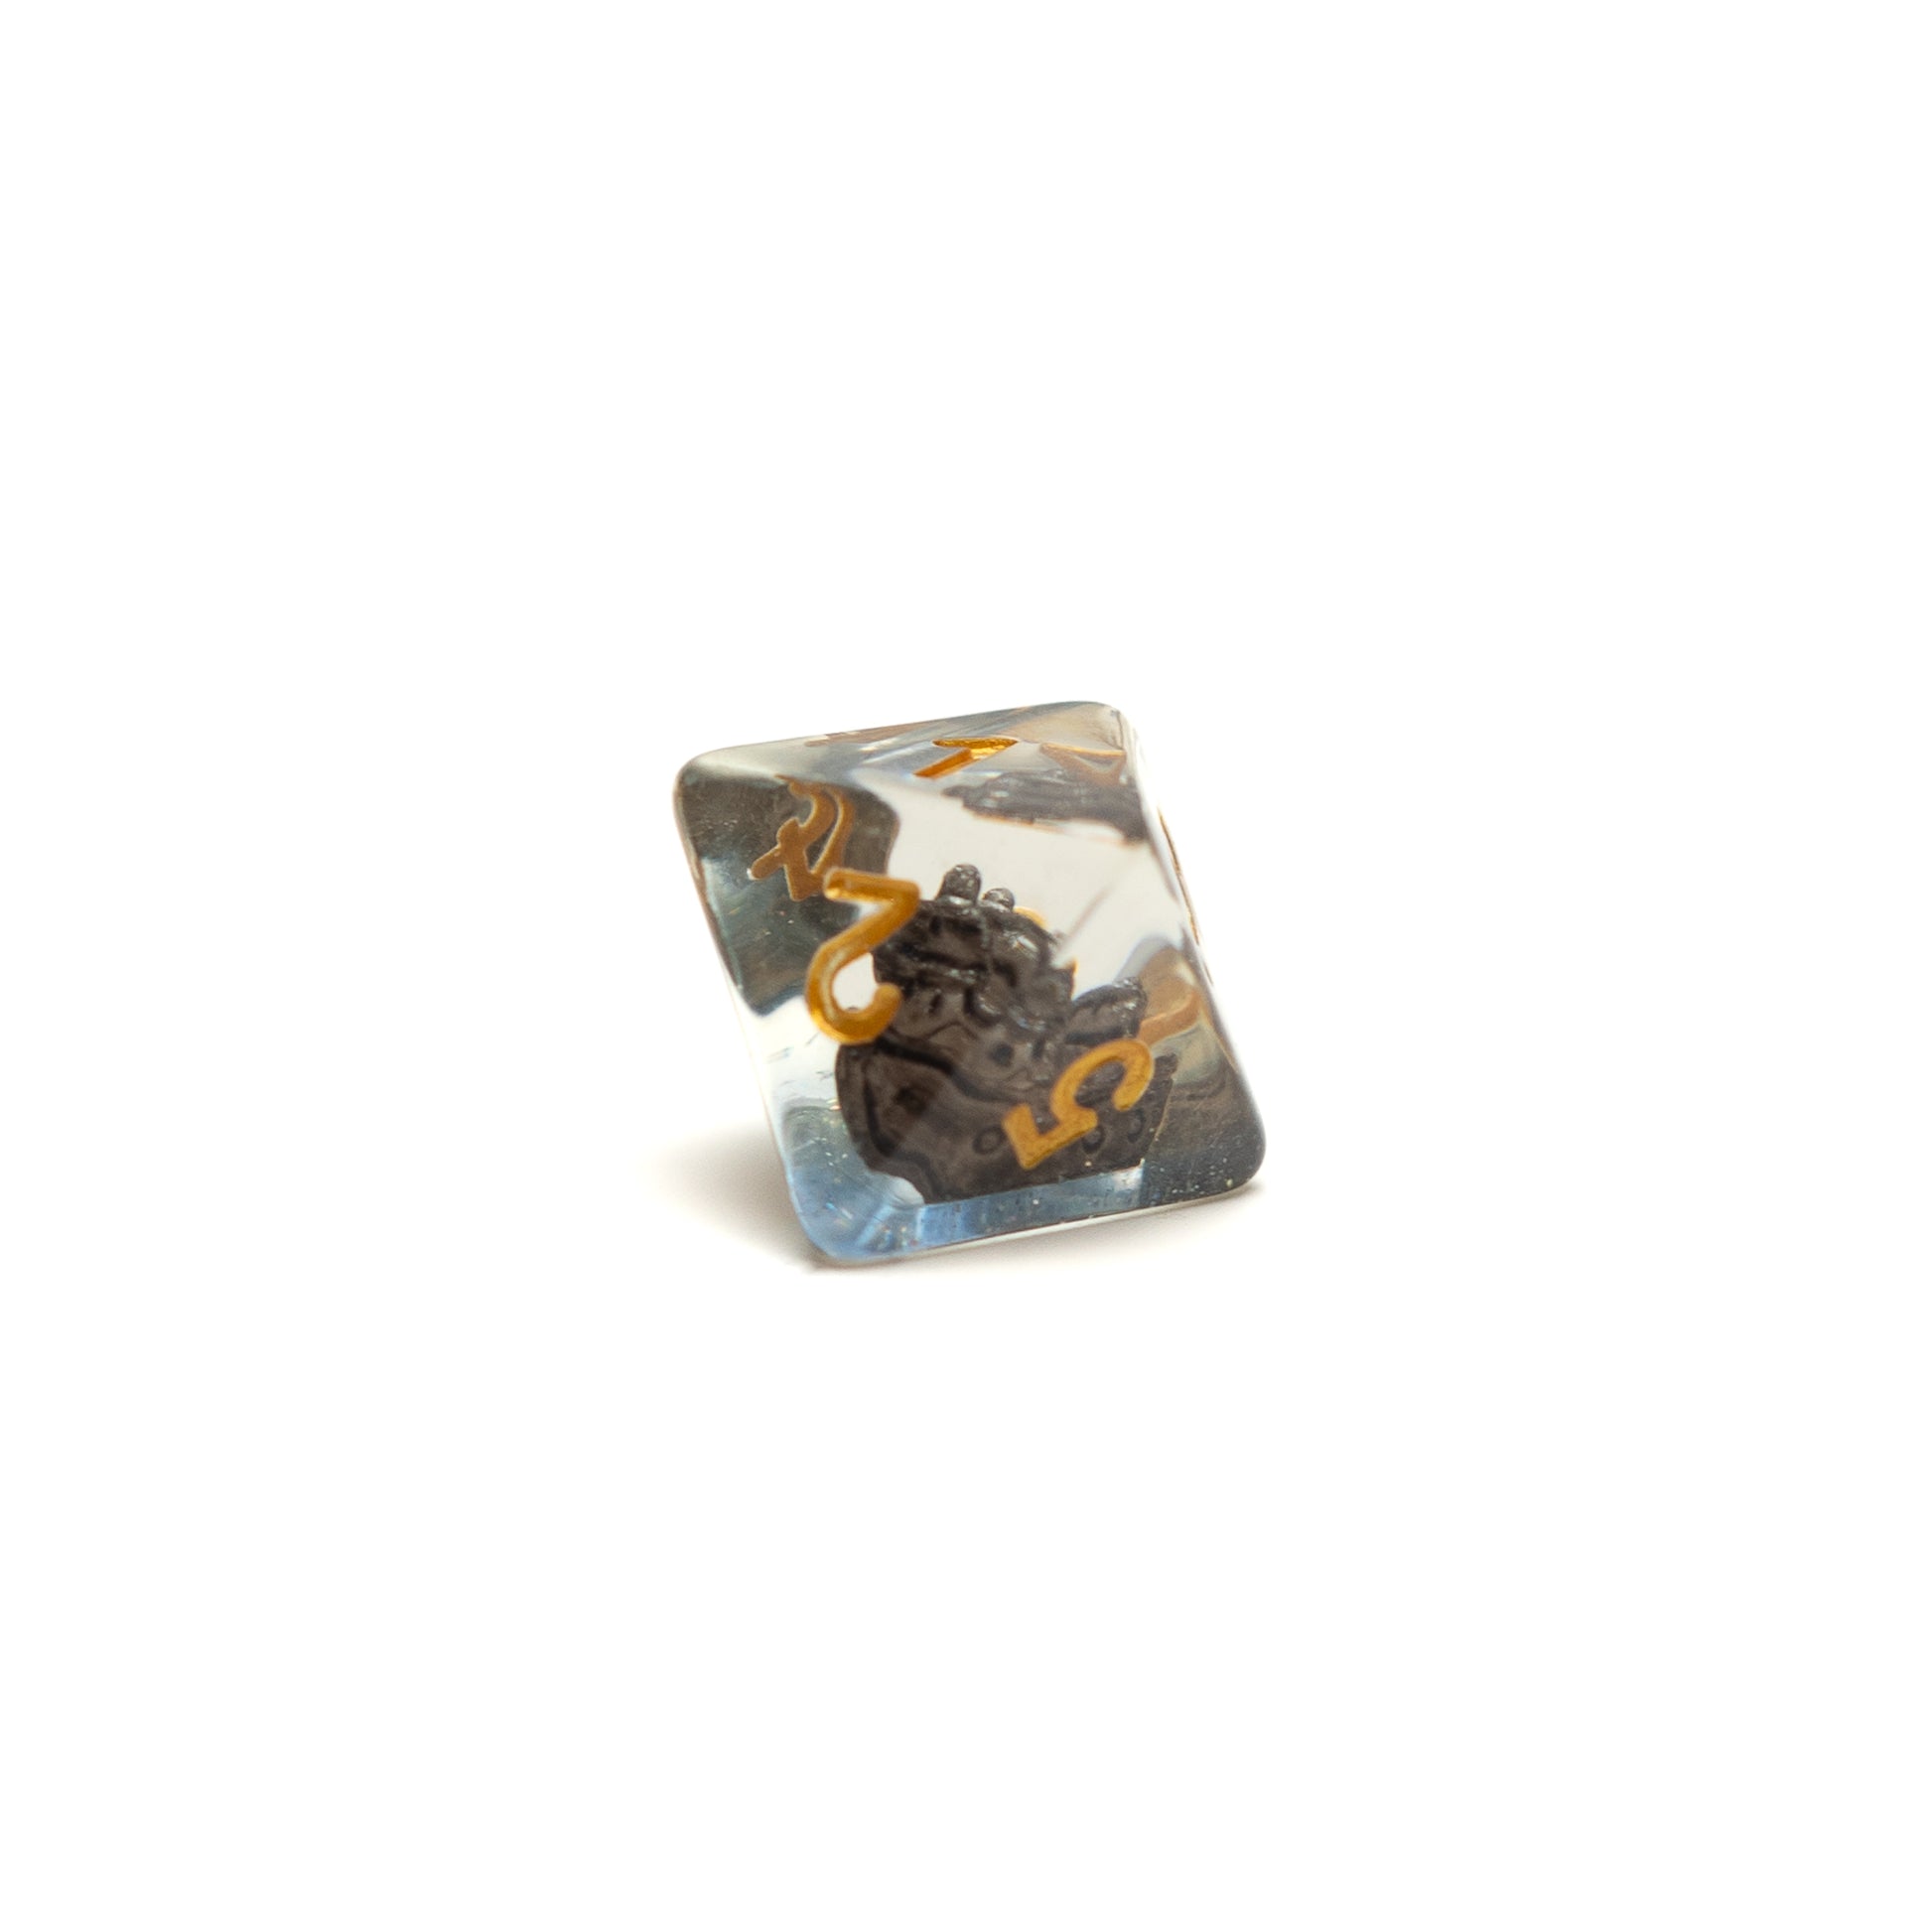 Roll Britannia Captain Timbers Dungeons and Dragons D8 acrylic dice with ship and ocean inside